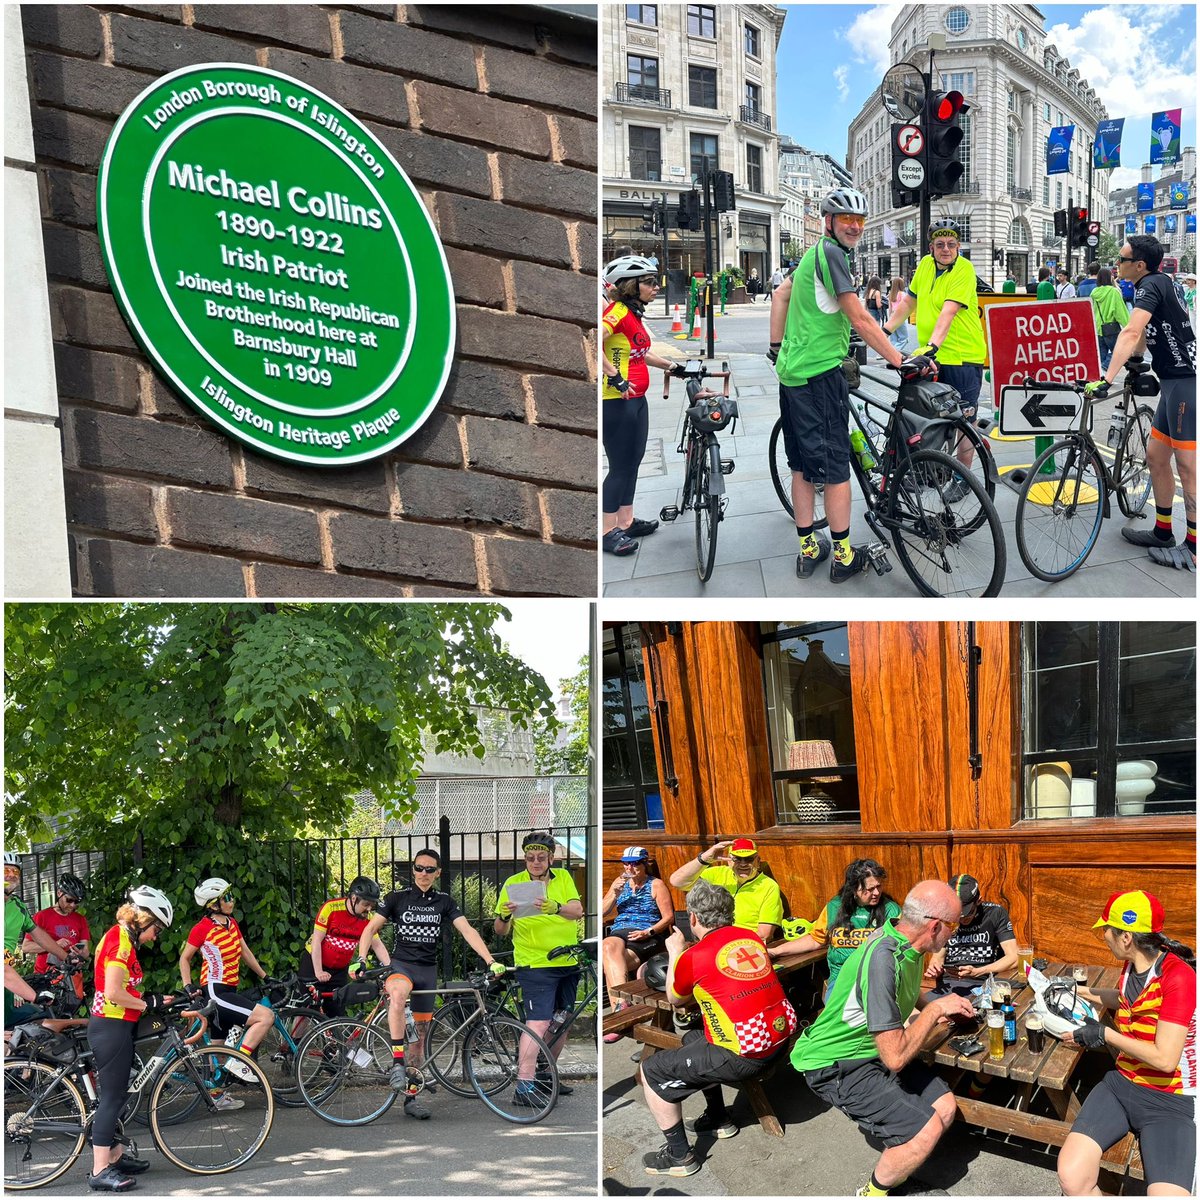 Yesterday’s club ride was all about #Irish history in #london See our website for forthcoming rides. #clarioncyclingclub #cycling #londonlife